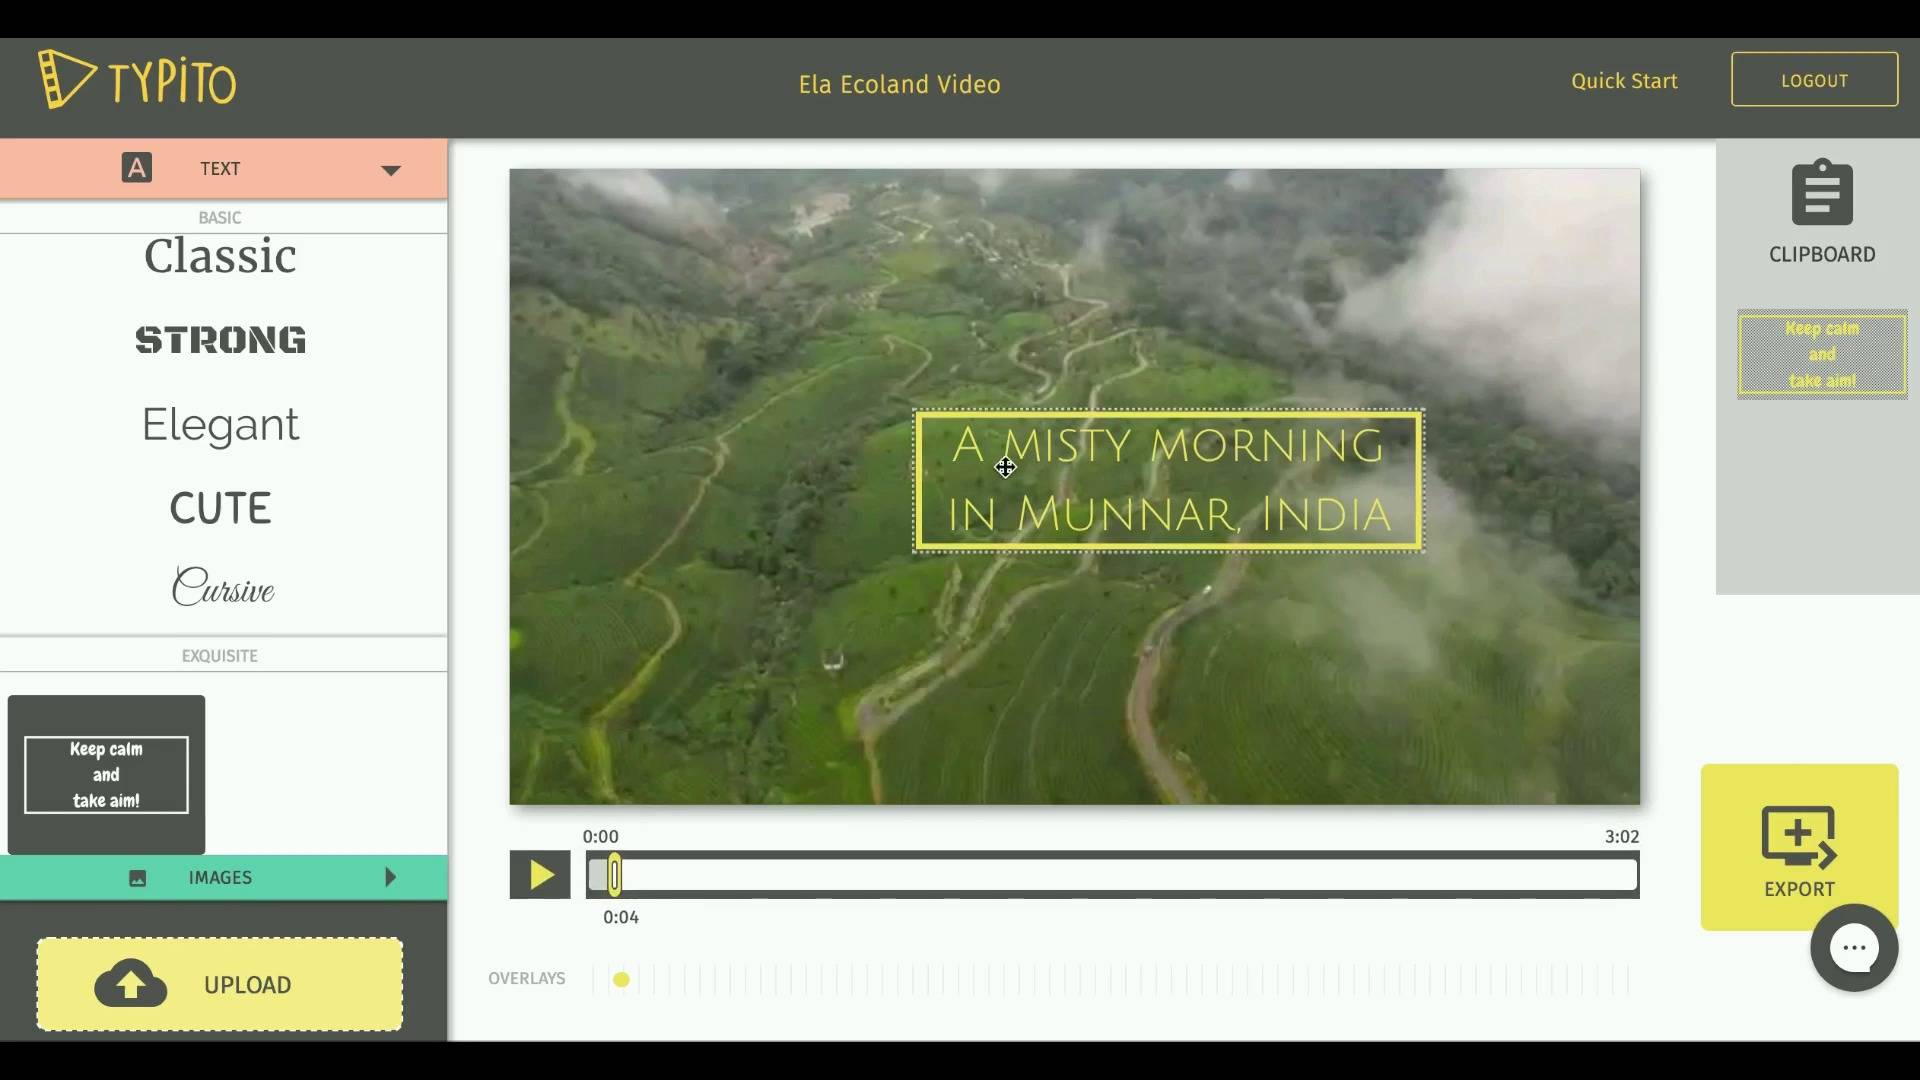 That's us testing out the first version of Typito's text templates on a footage of Munnar in Kerala